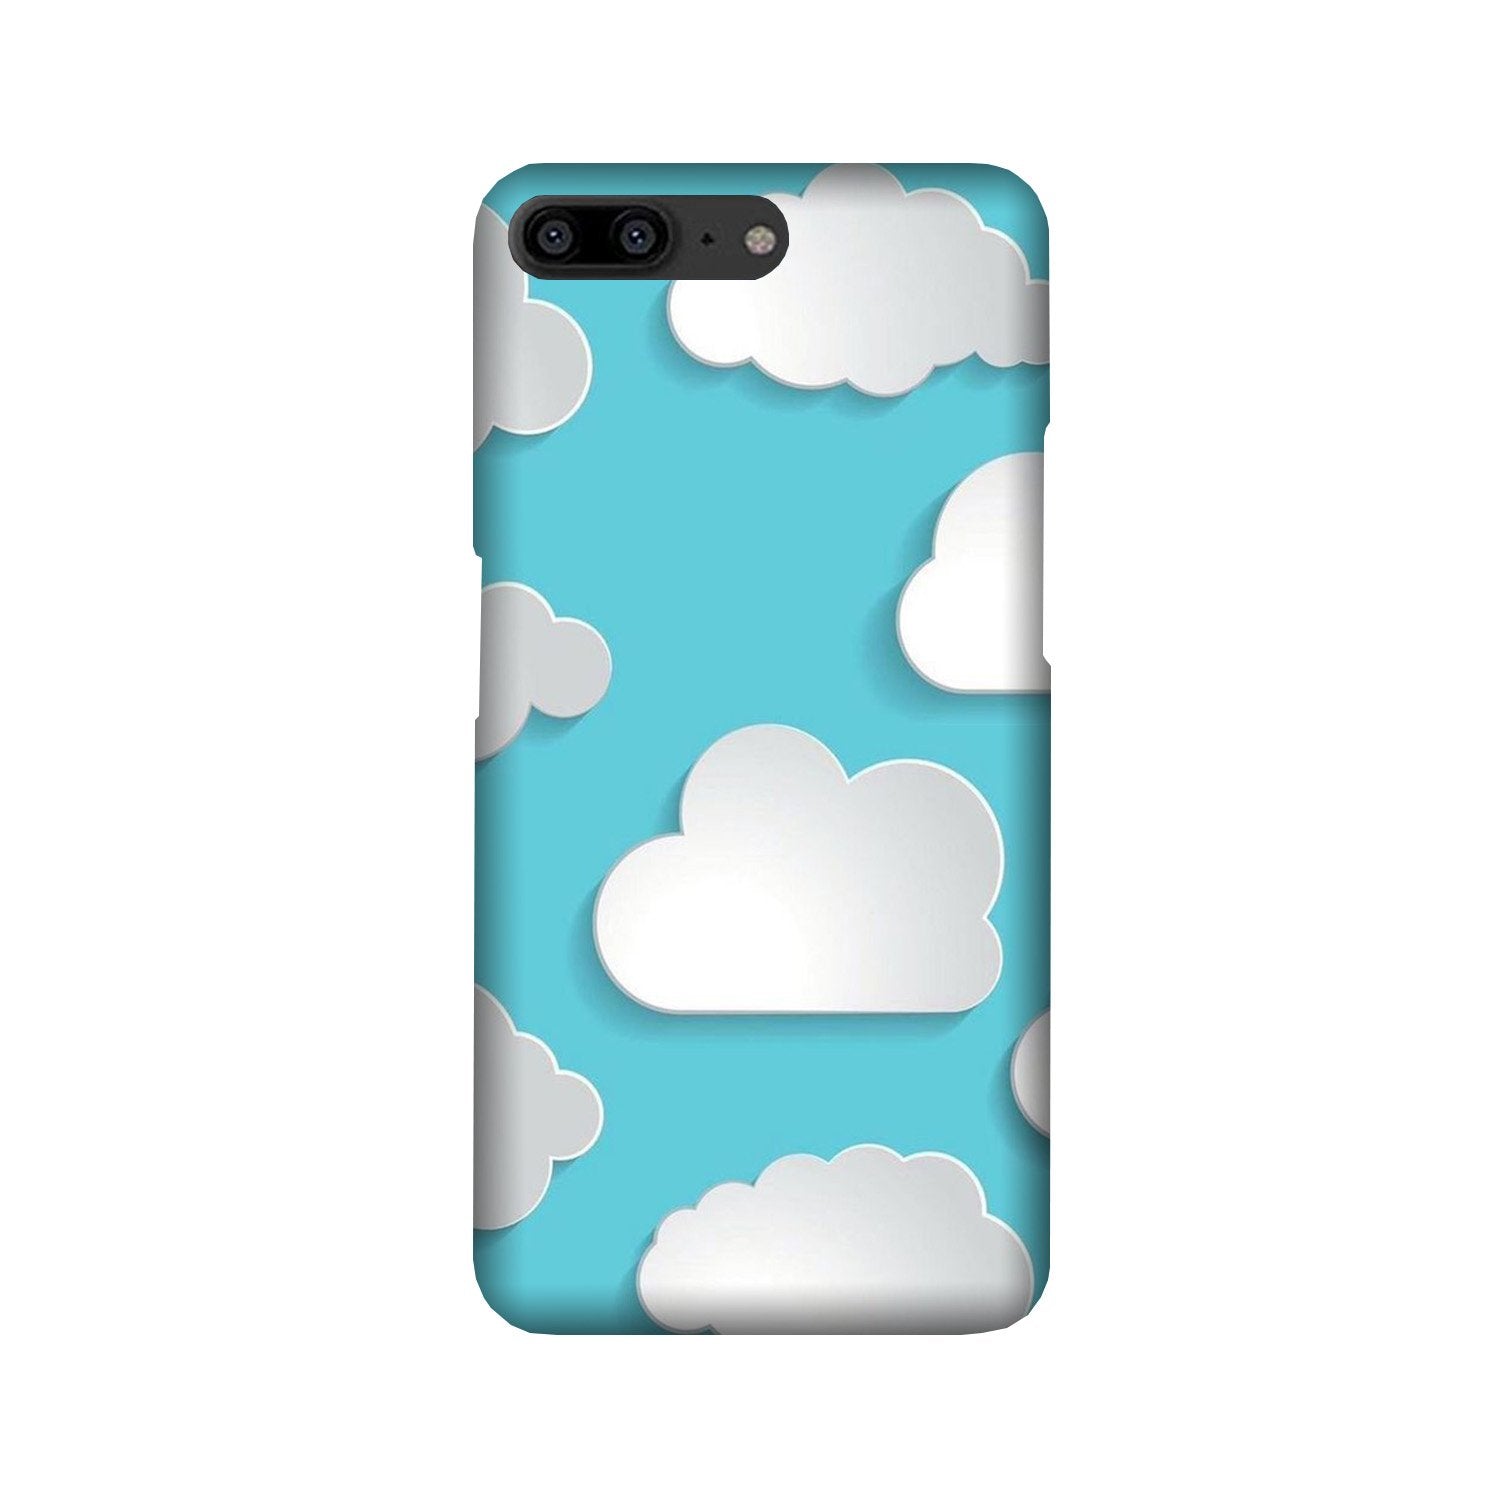 Clouds Case for OnePlus 5 (Design No. 210)